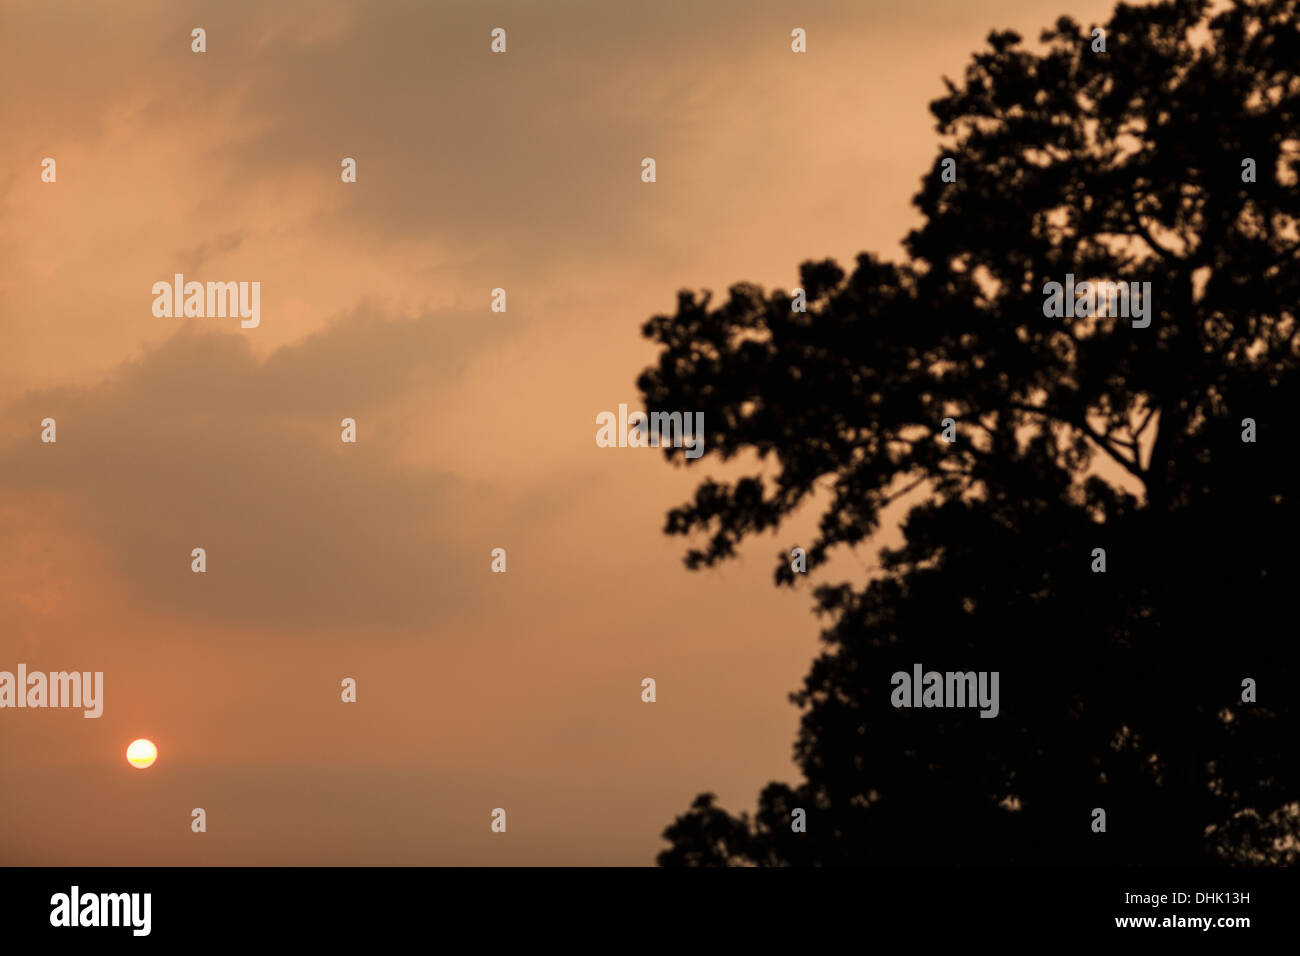 Landscape of sunset by a tree, Shanxi Province, China Stock Photo